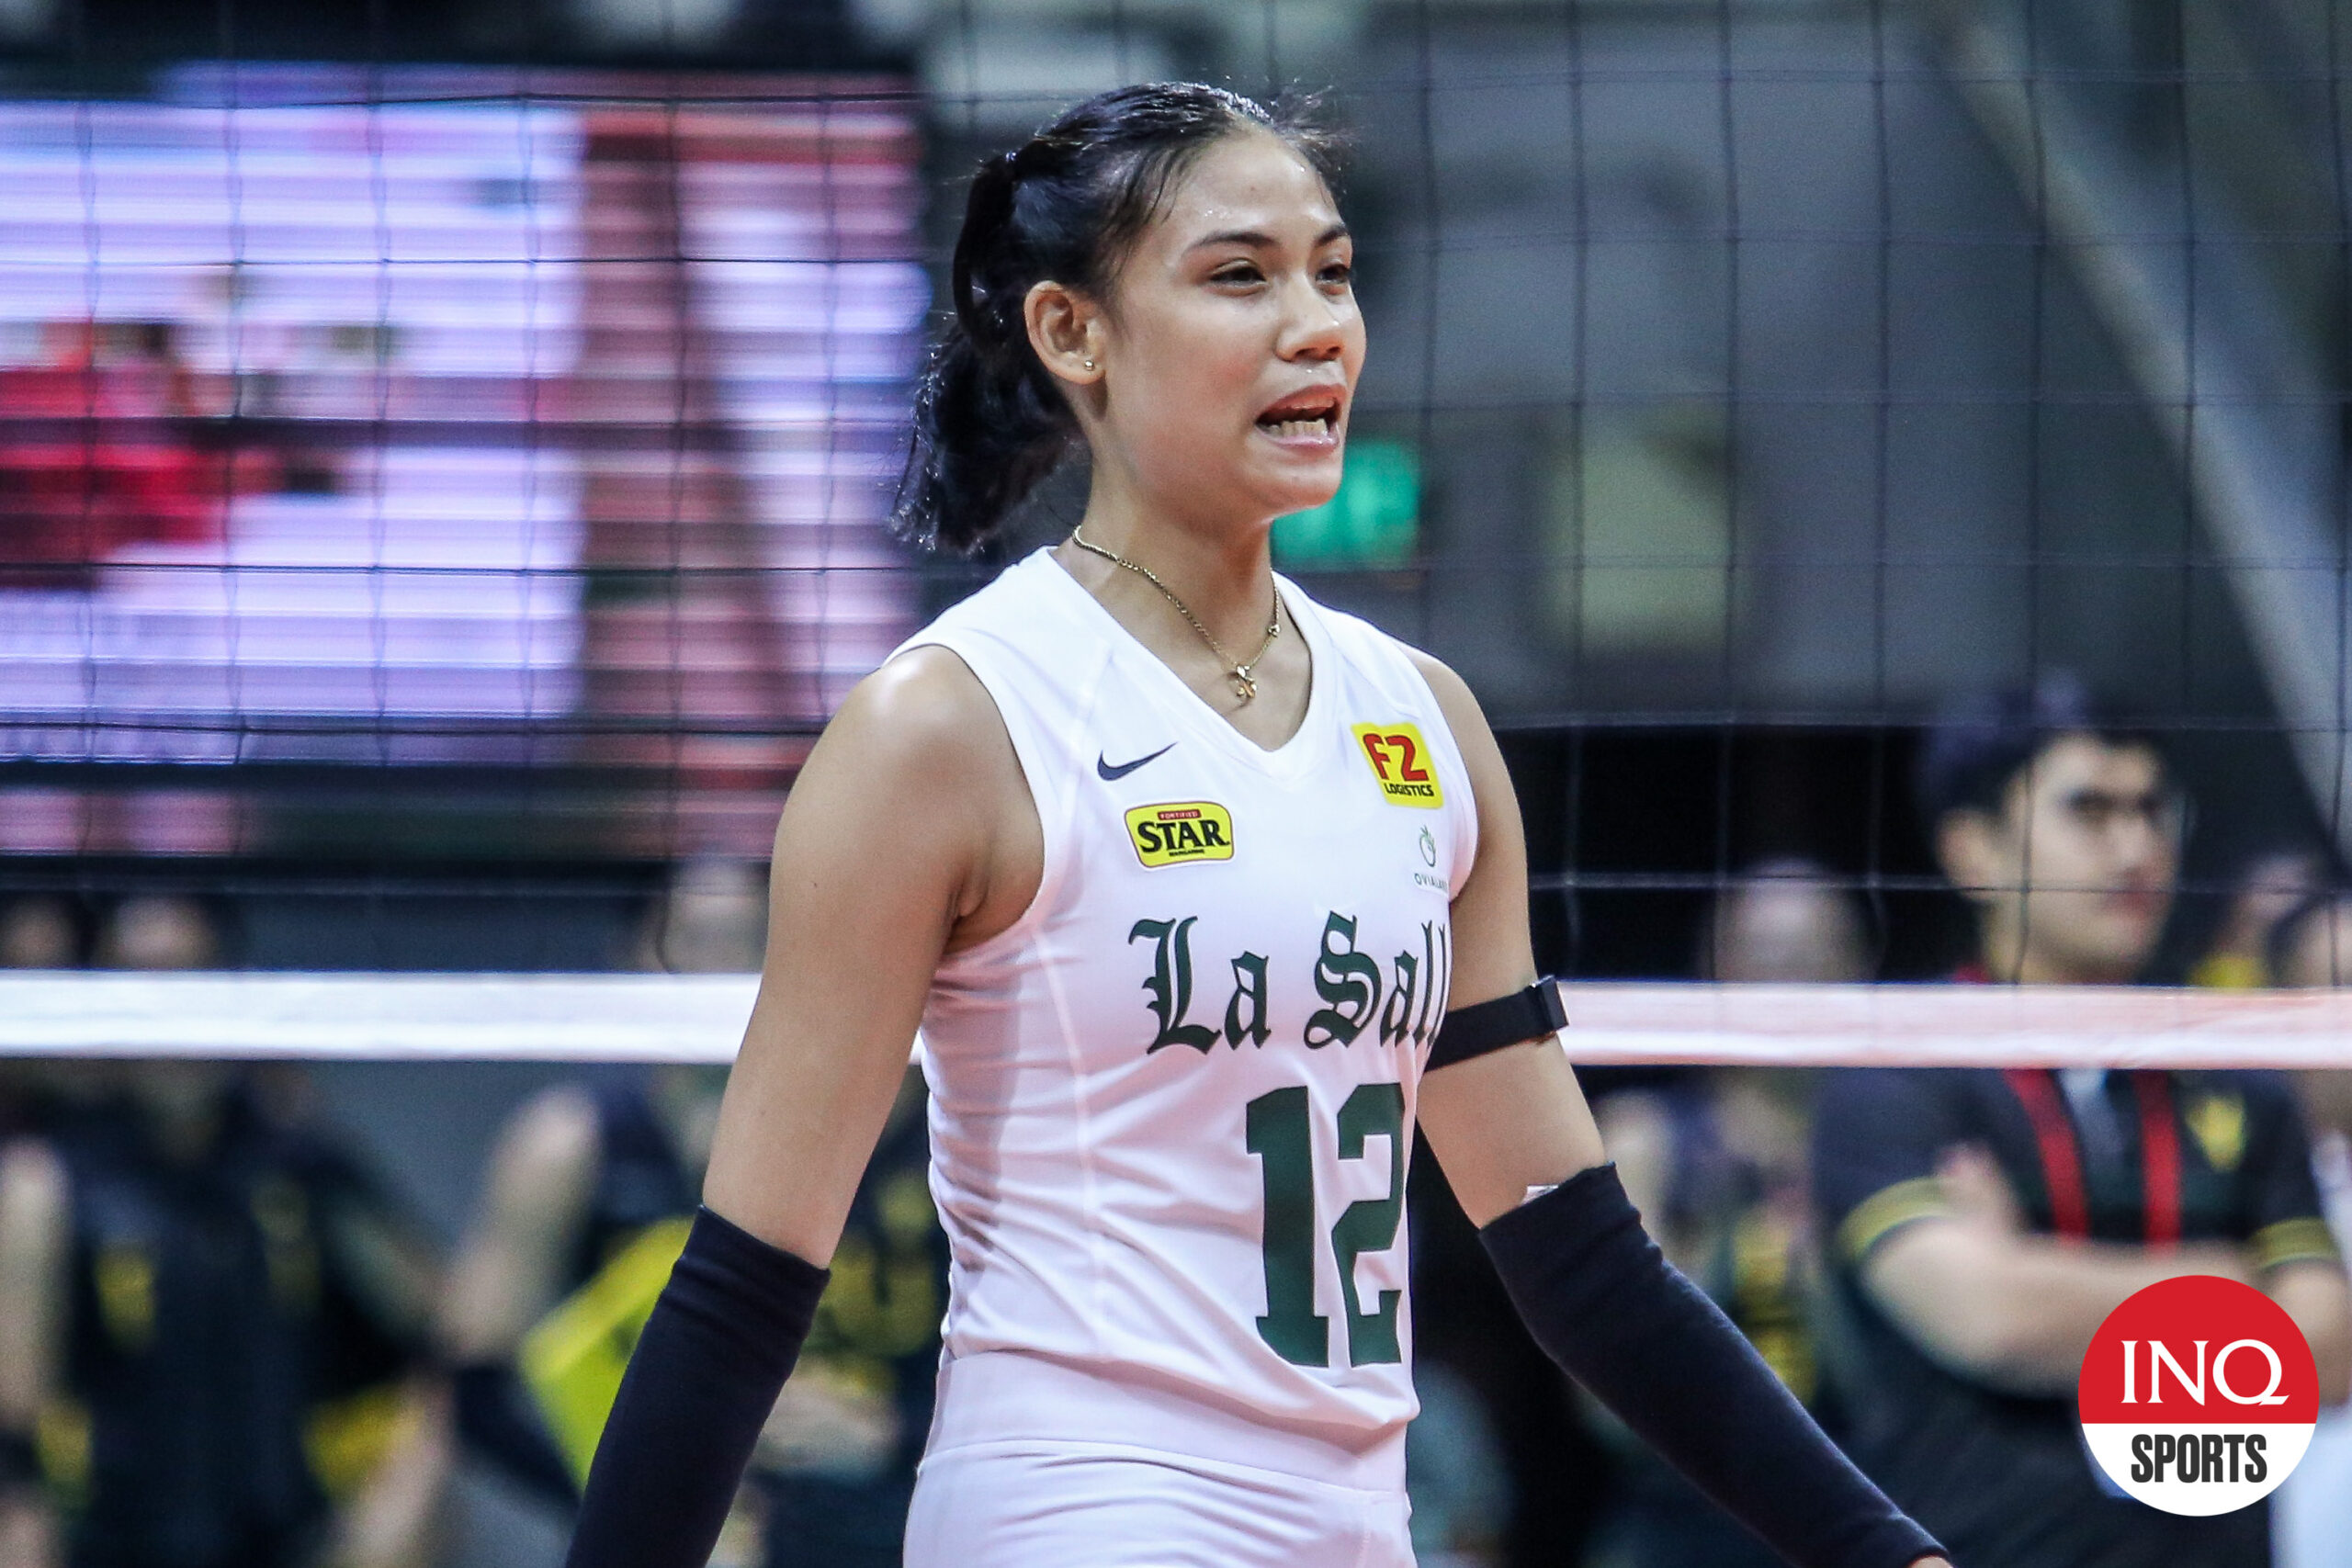 La Salle Lady Spikers' Angel Canino UAAP volleyball